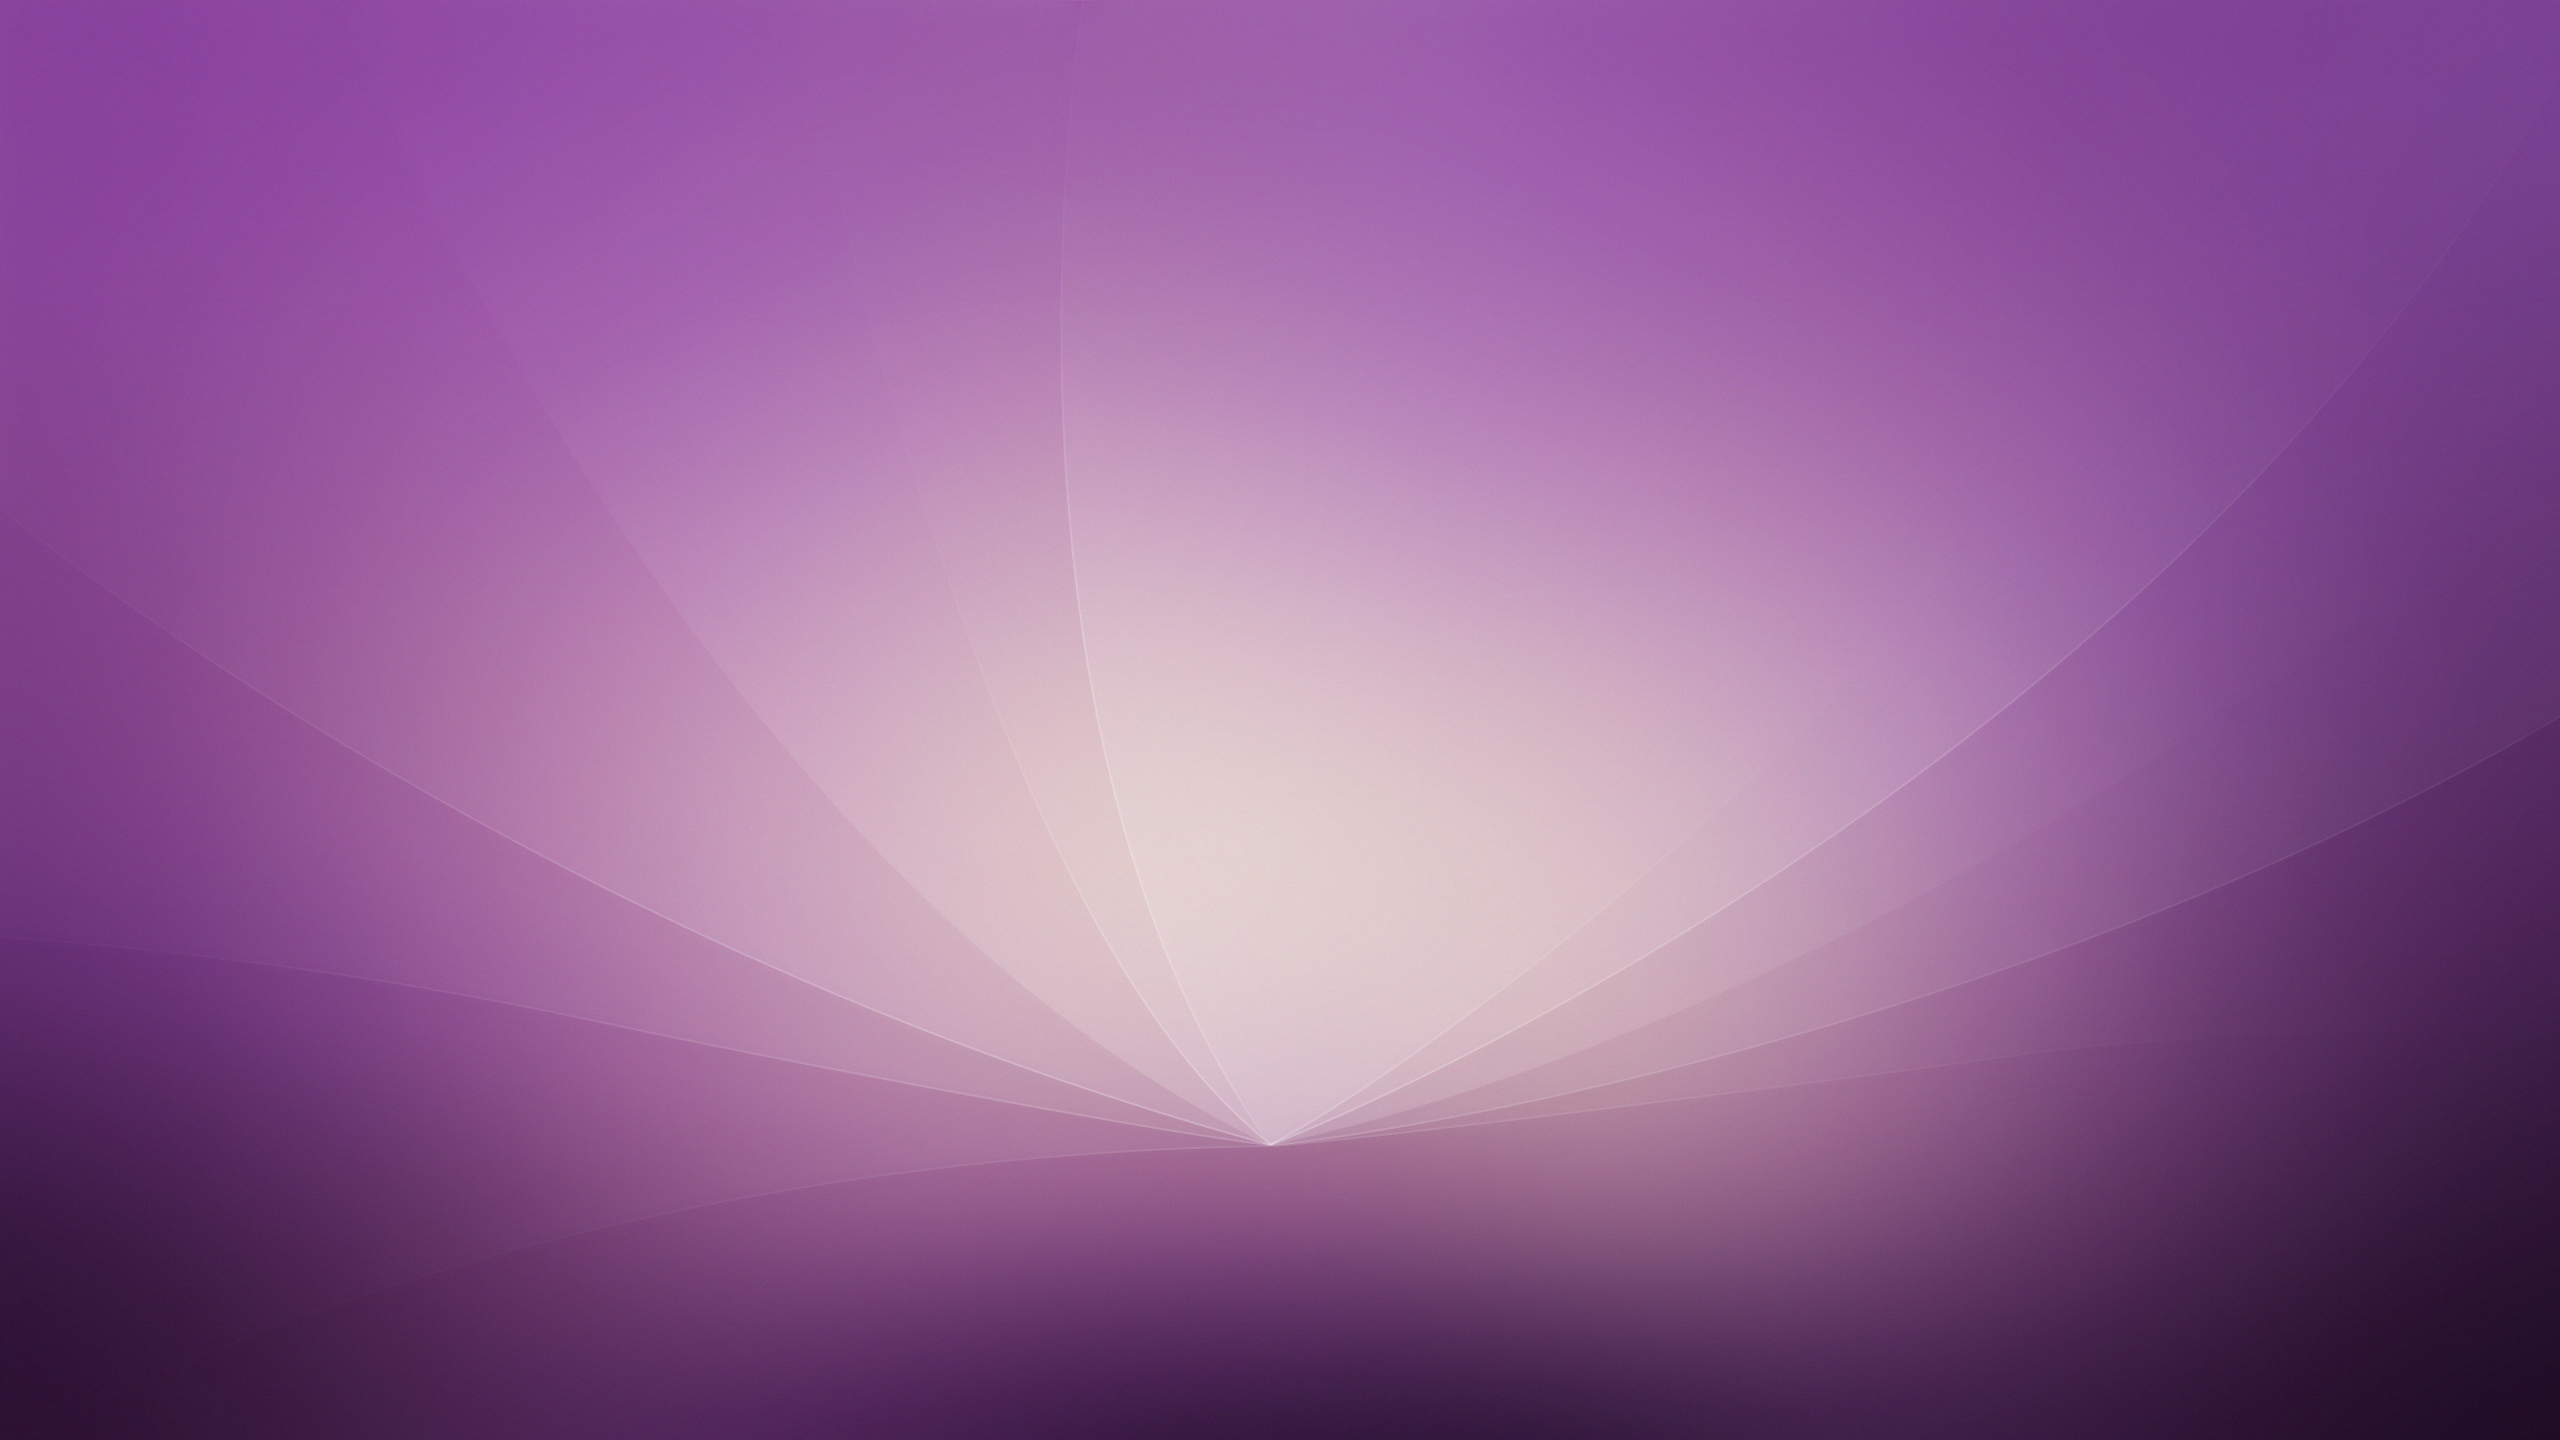 Simple Clean Abstract Purple HD Desktop wallpaper images and photos